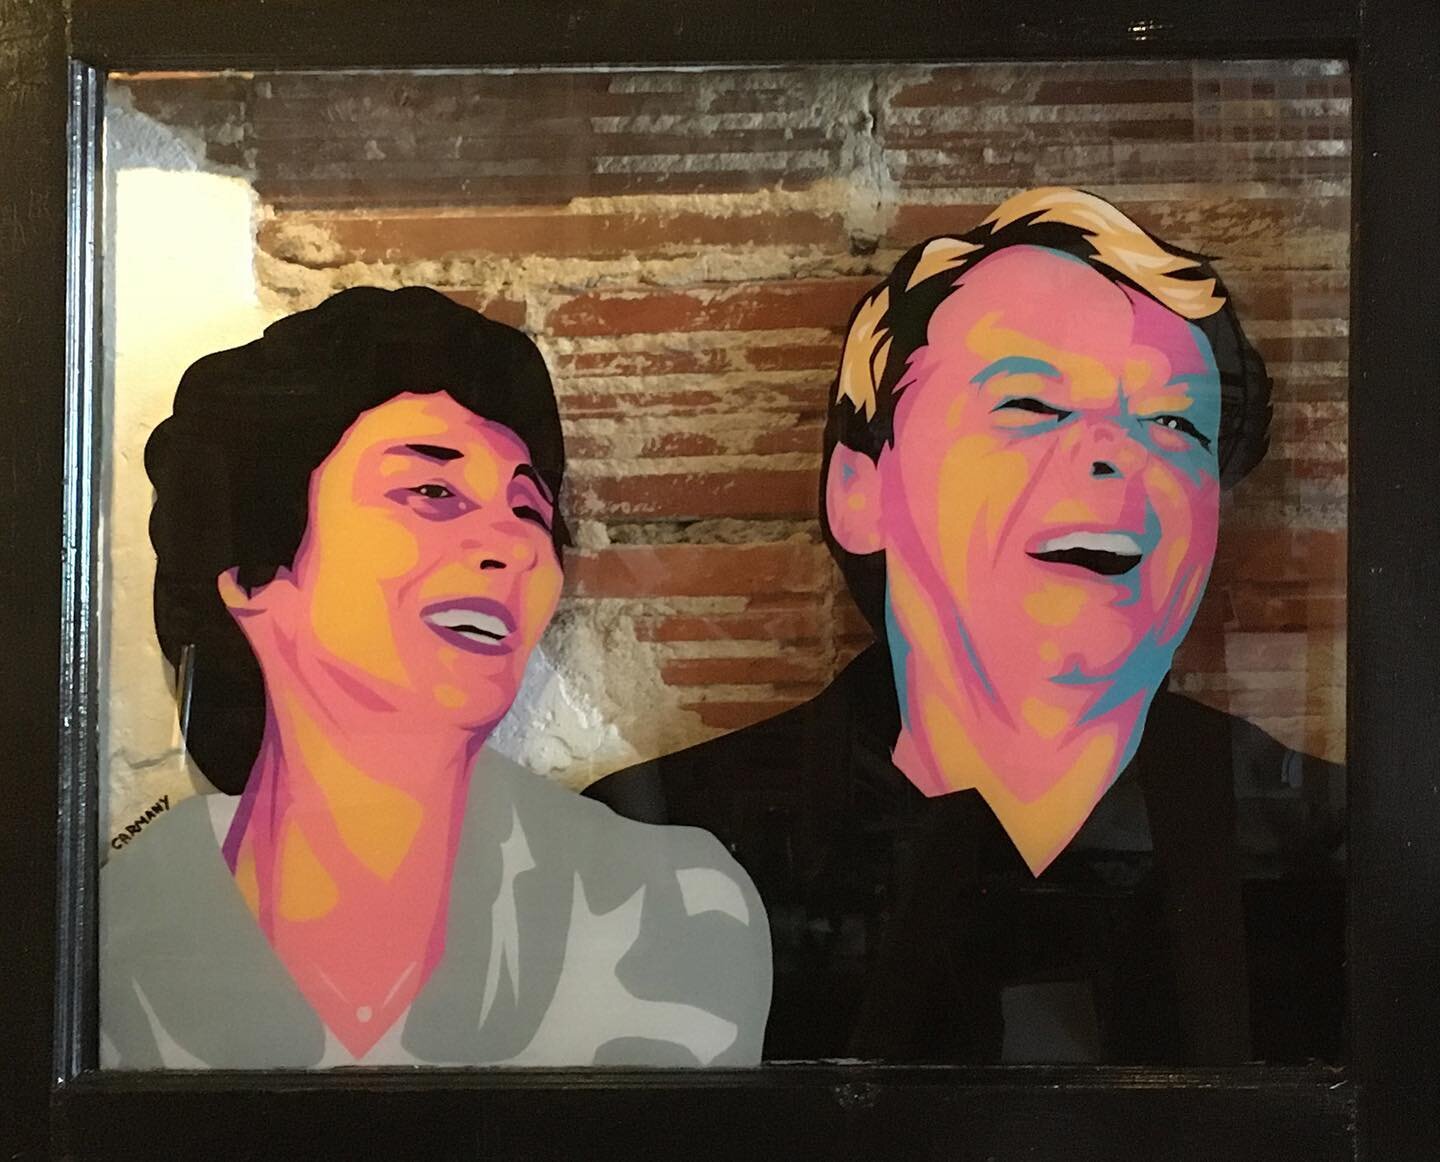 Dad turns 65 today and mom wanted him to have a painting of his parents so here they are: Paul and Esther 
#newcontemporary #popart #reverseglasspainting #portraitpainting #wallart